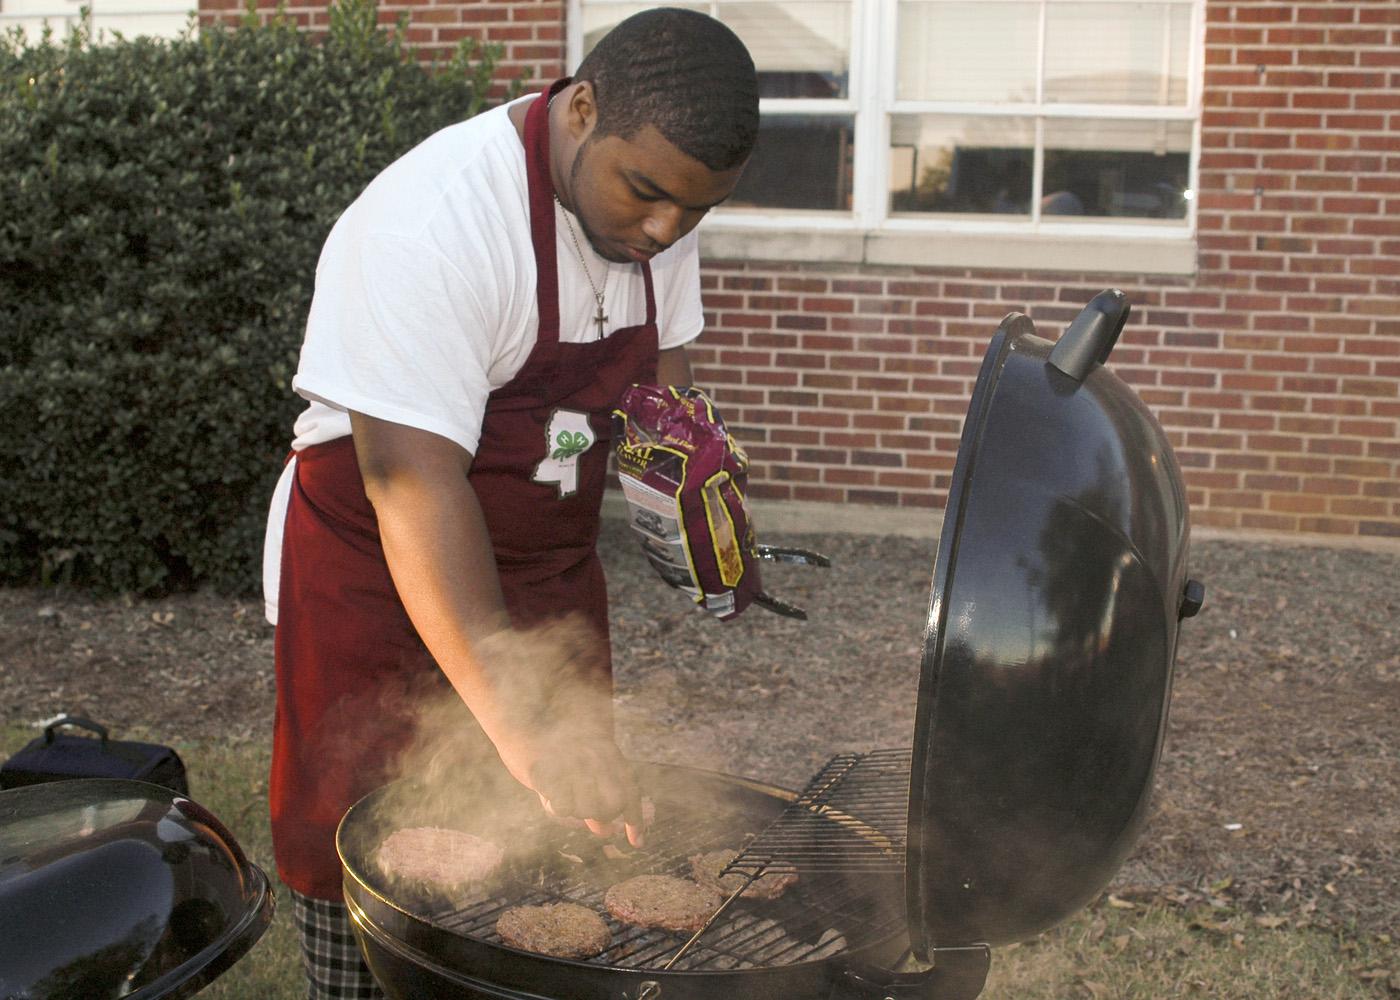 Mississippi State University Collegiate 4-H member Billy Hudson, 19, of Greenwood tries his hand at grilling during one of the club's recent football tailgates. While club members often get together to socialize, they make community service a priority. (Photo by Patti Drapala)